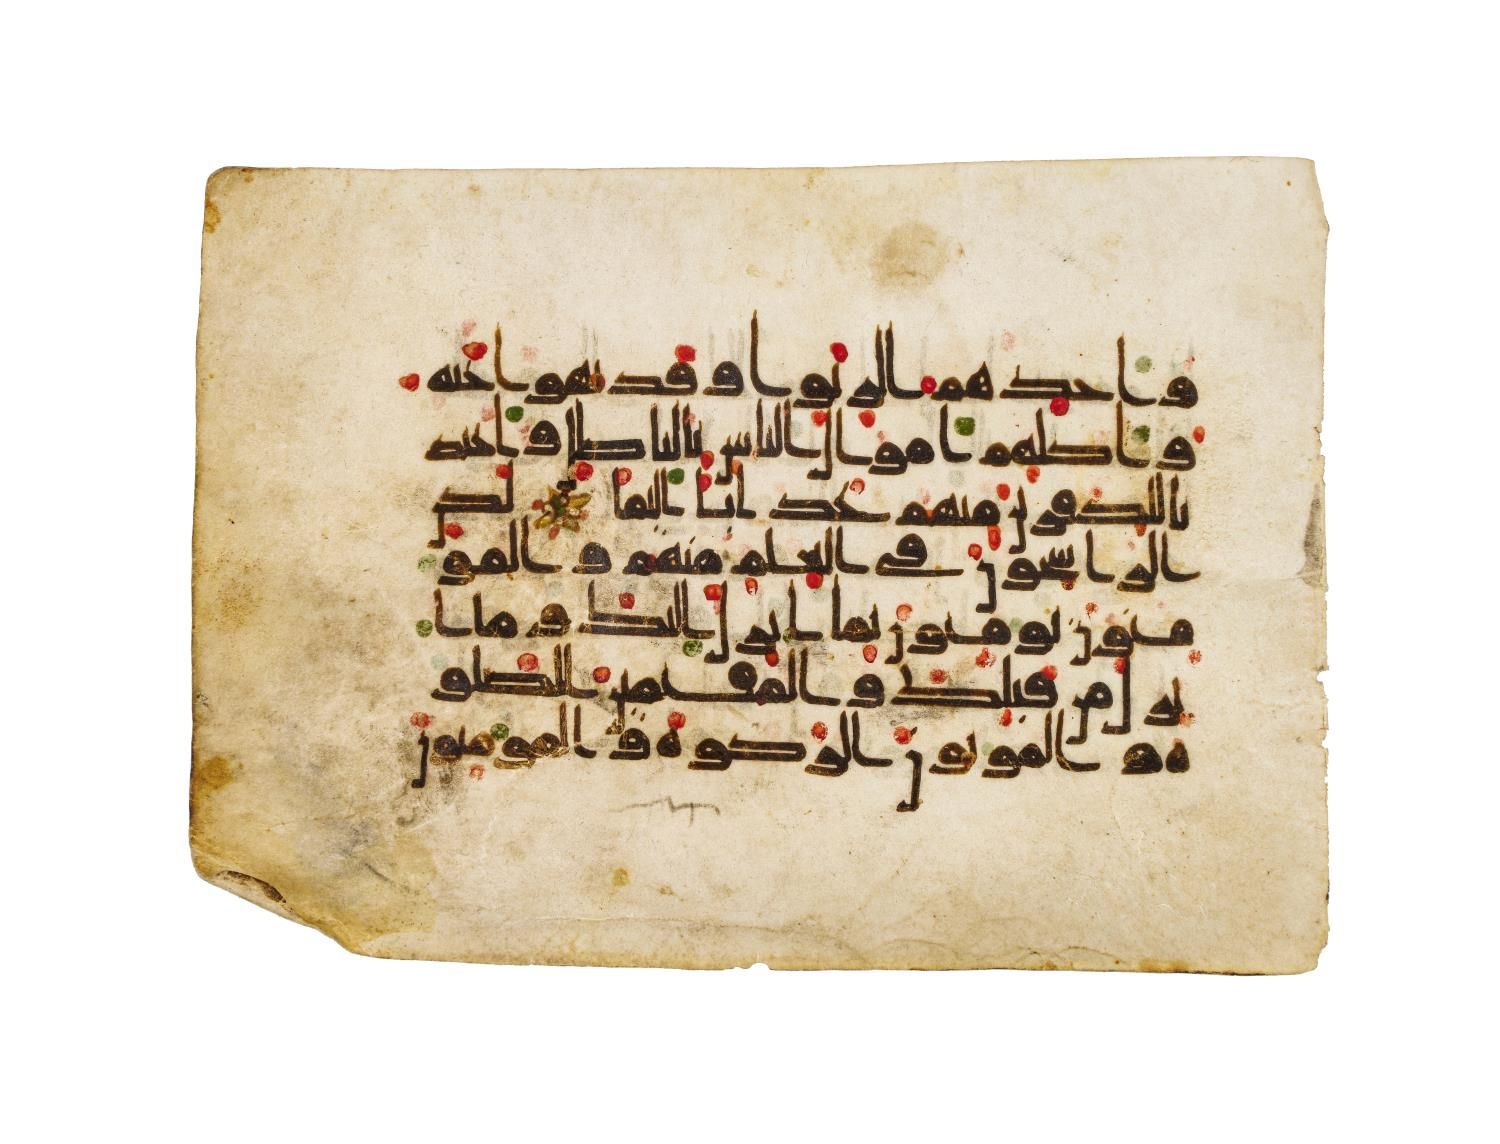 A KUFIC QURAN FOLIO, NEAR EAST OR NORTH AFRICA, 9TH/10TH CENTURY EIN KUFISCHES K&hellip;